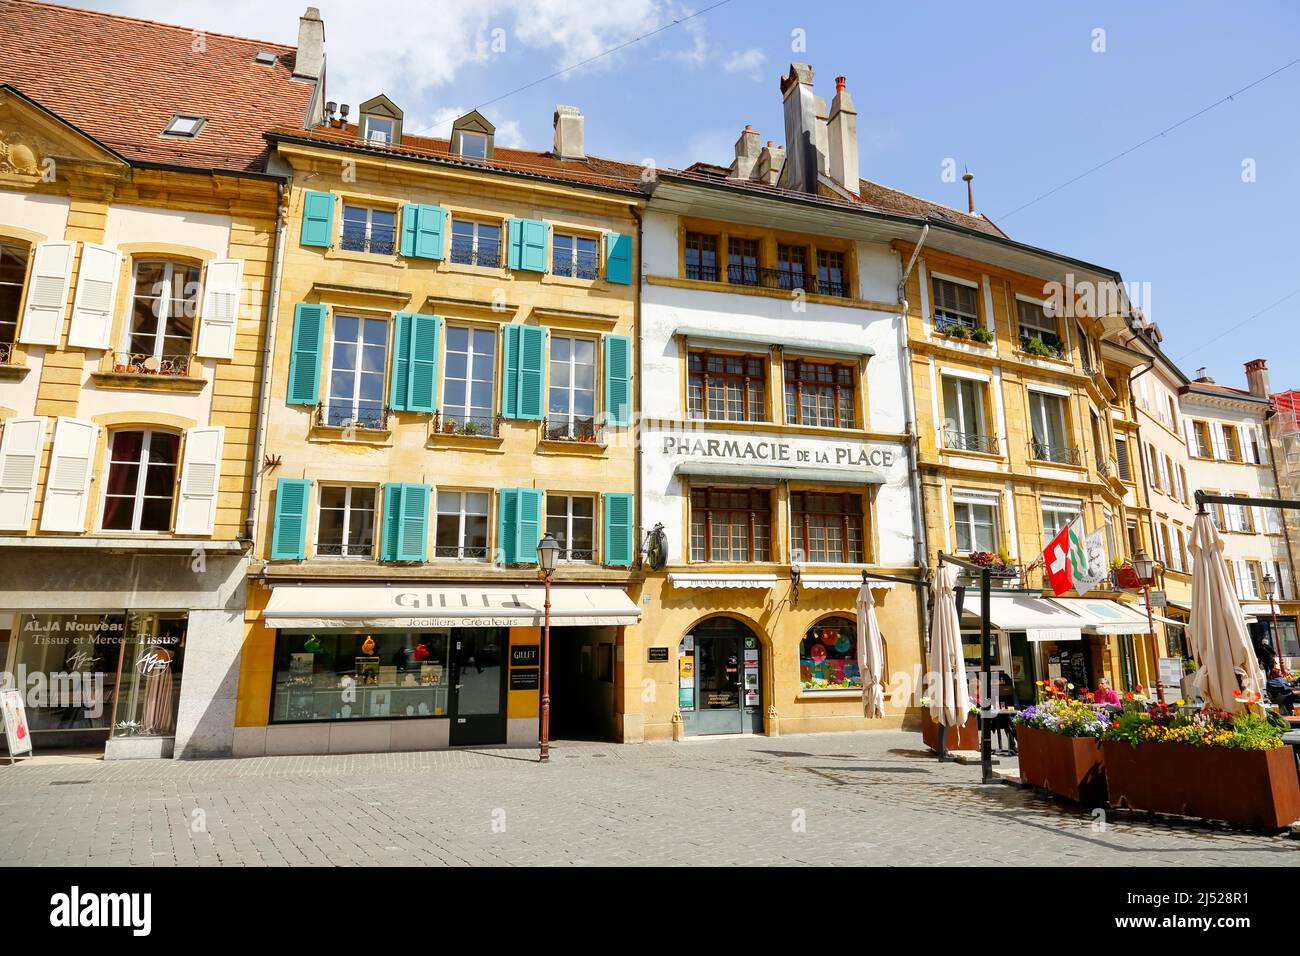 Yverdon-les-Bains, Switzerland - 18 April 2017: Various, colorful tenement houses along the frontage of the town square. There are several shop window Stock Photo